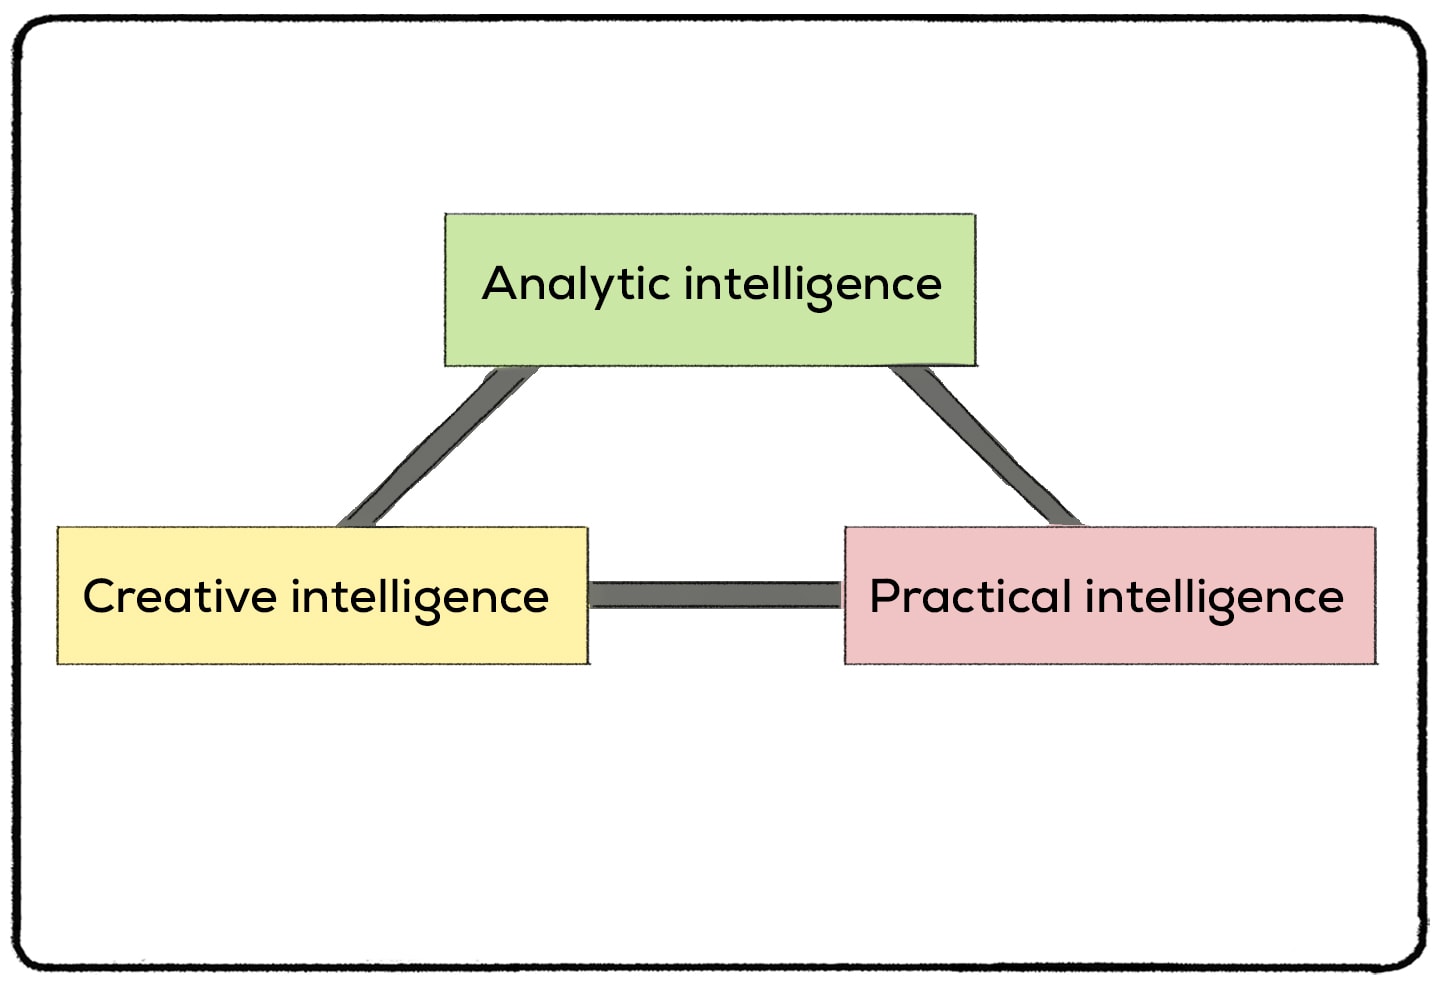 three types of intelligence: analytical, creative, and practical